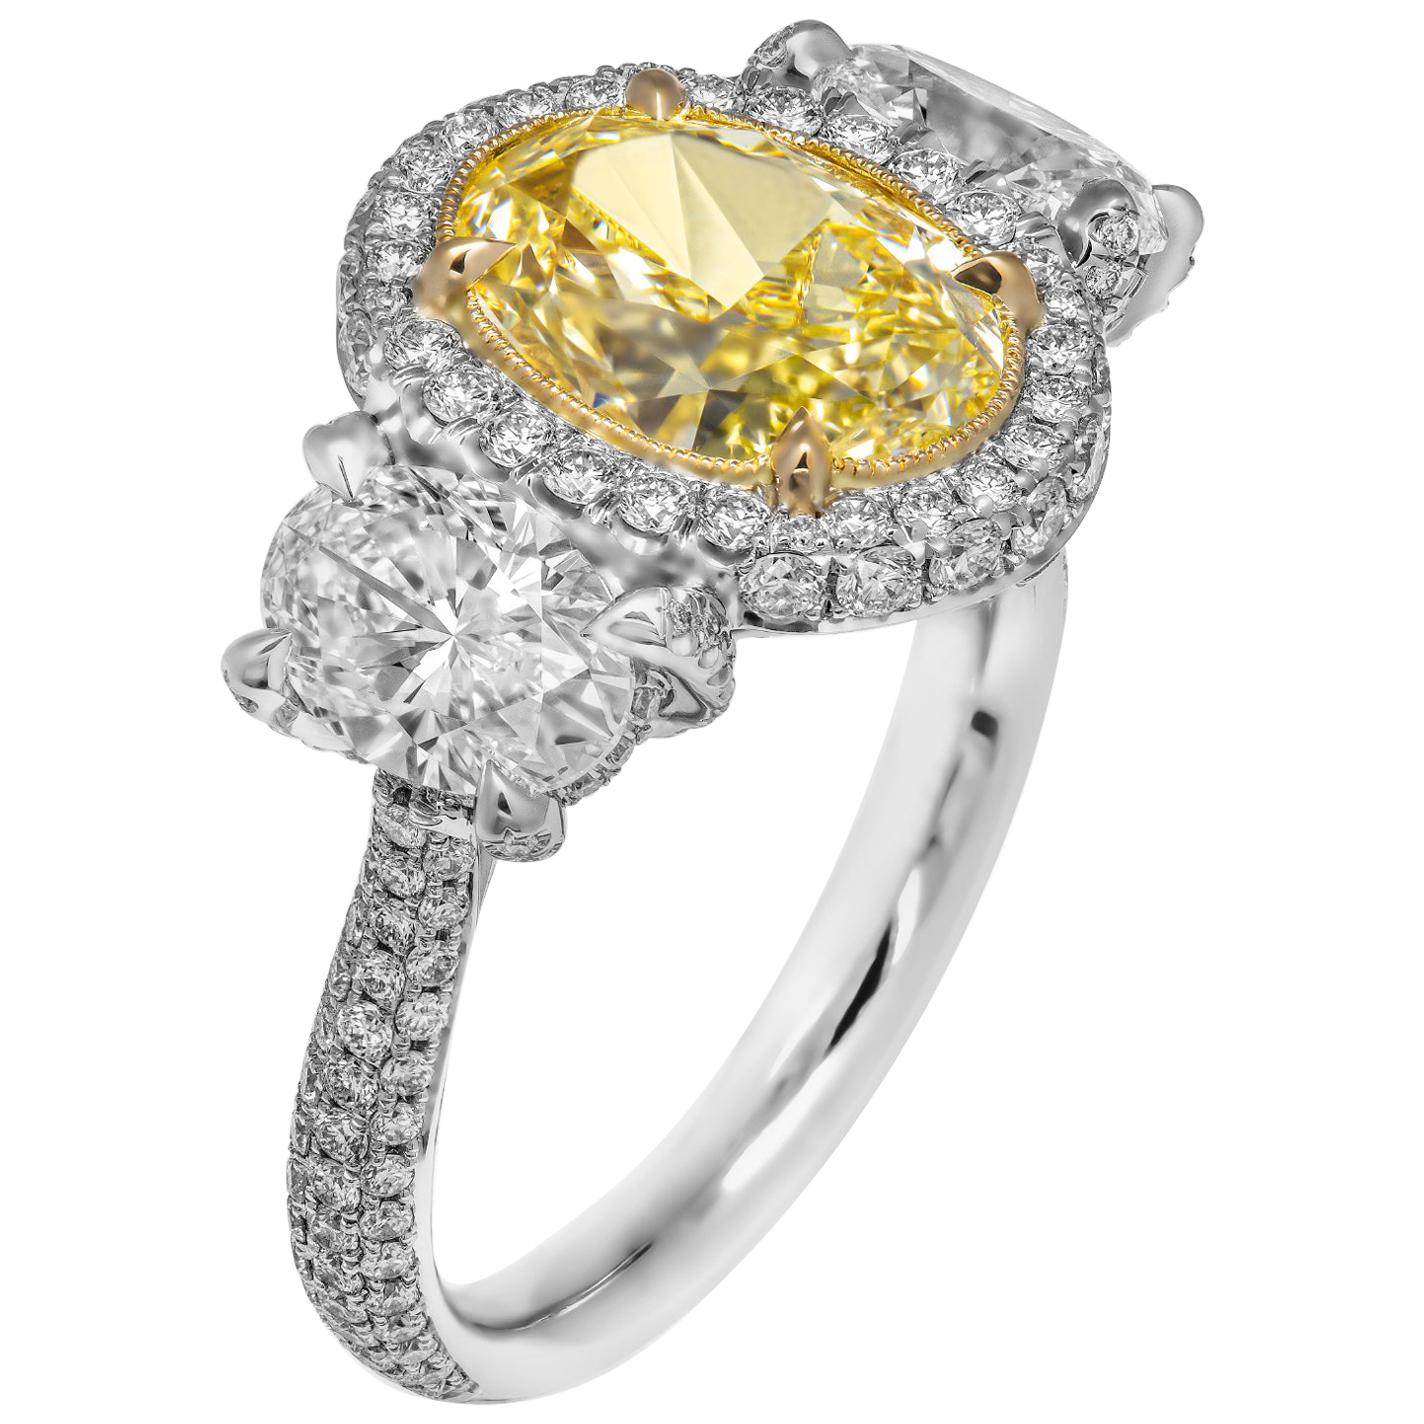 GIA Certifies 3-Stone Ring with 3.52 Carat Fancy Light Yellow Oval Diamond